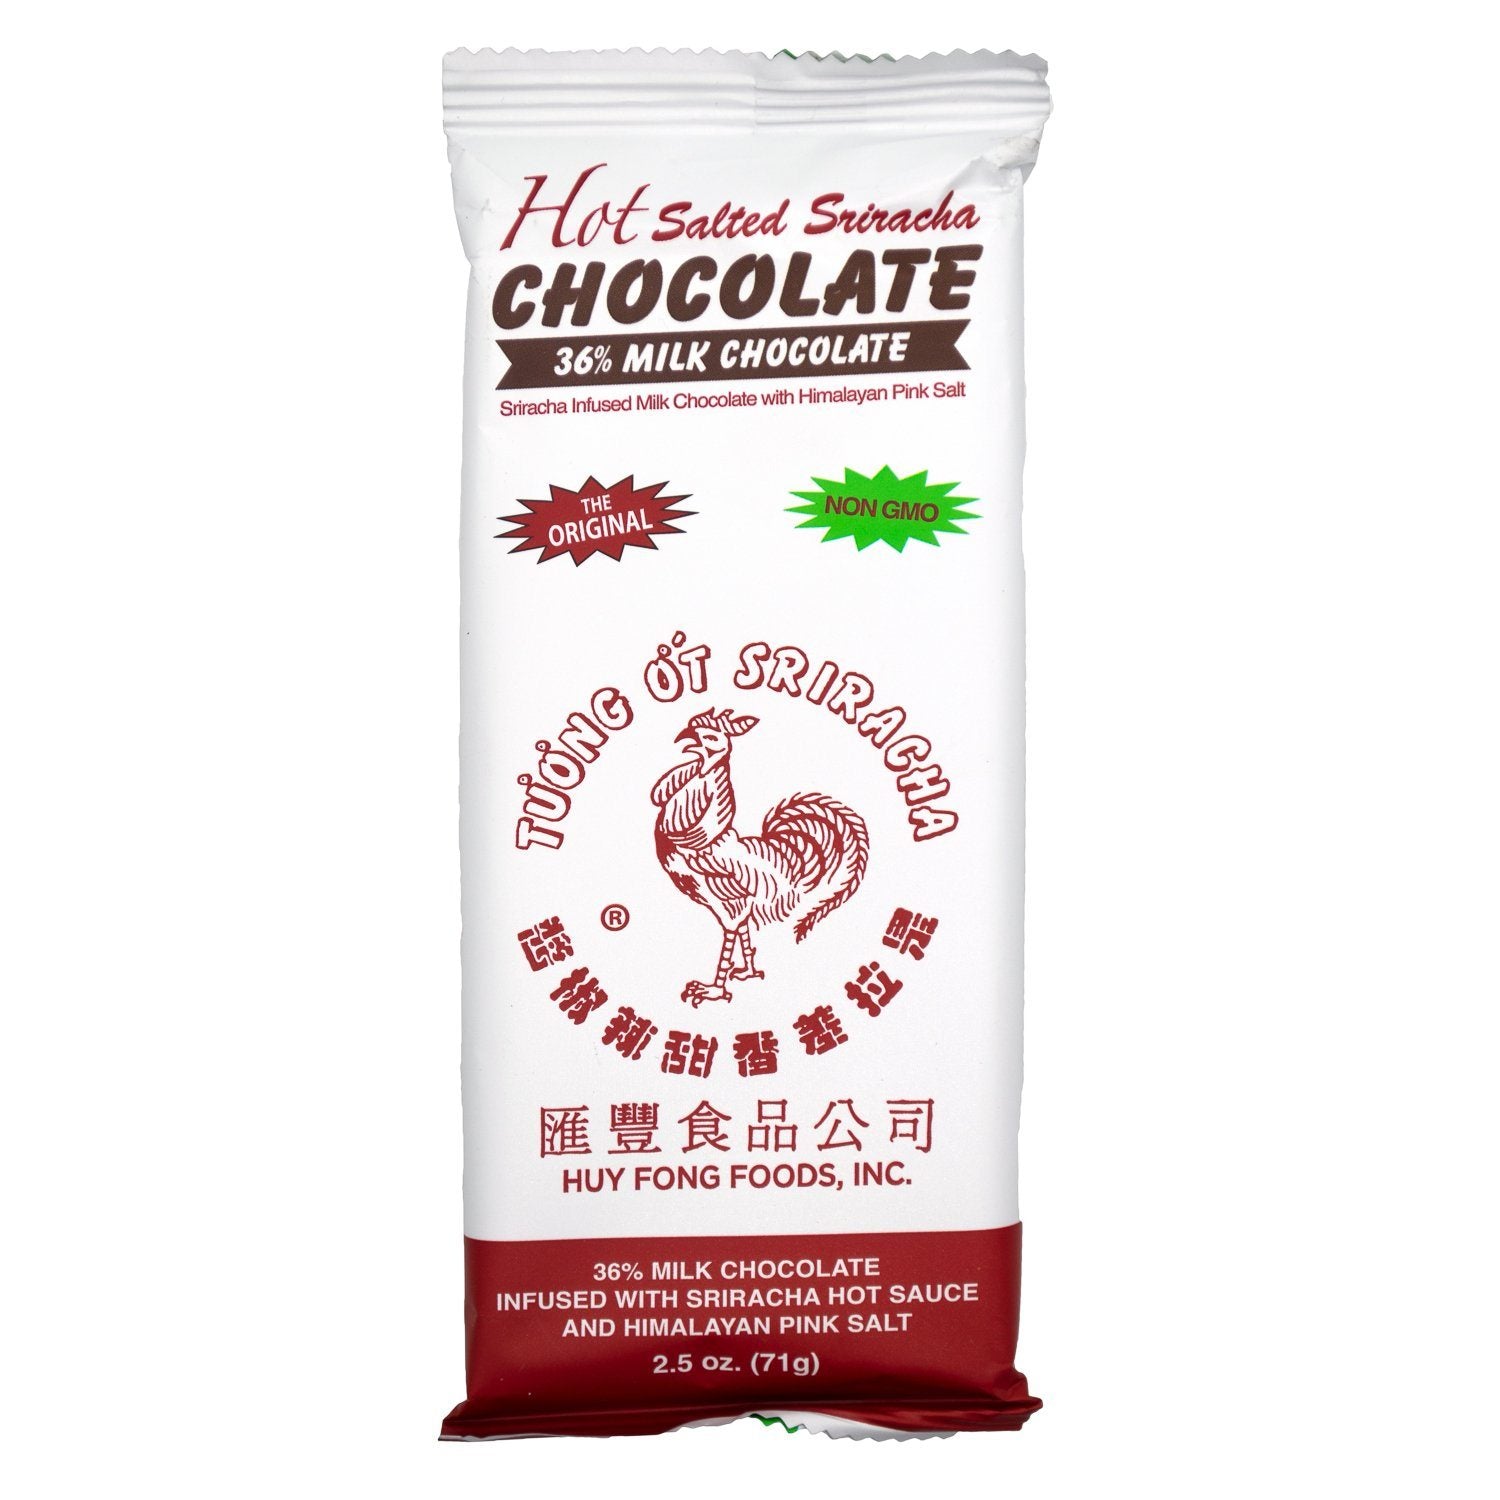 Rock Da Rooster Chocolate Bars Meltable Rock Da Rooster 36% Milk Chocolate 2.5 Ounce 